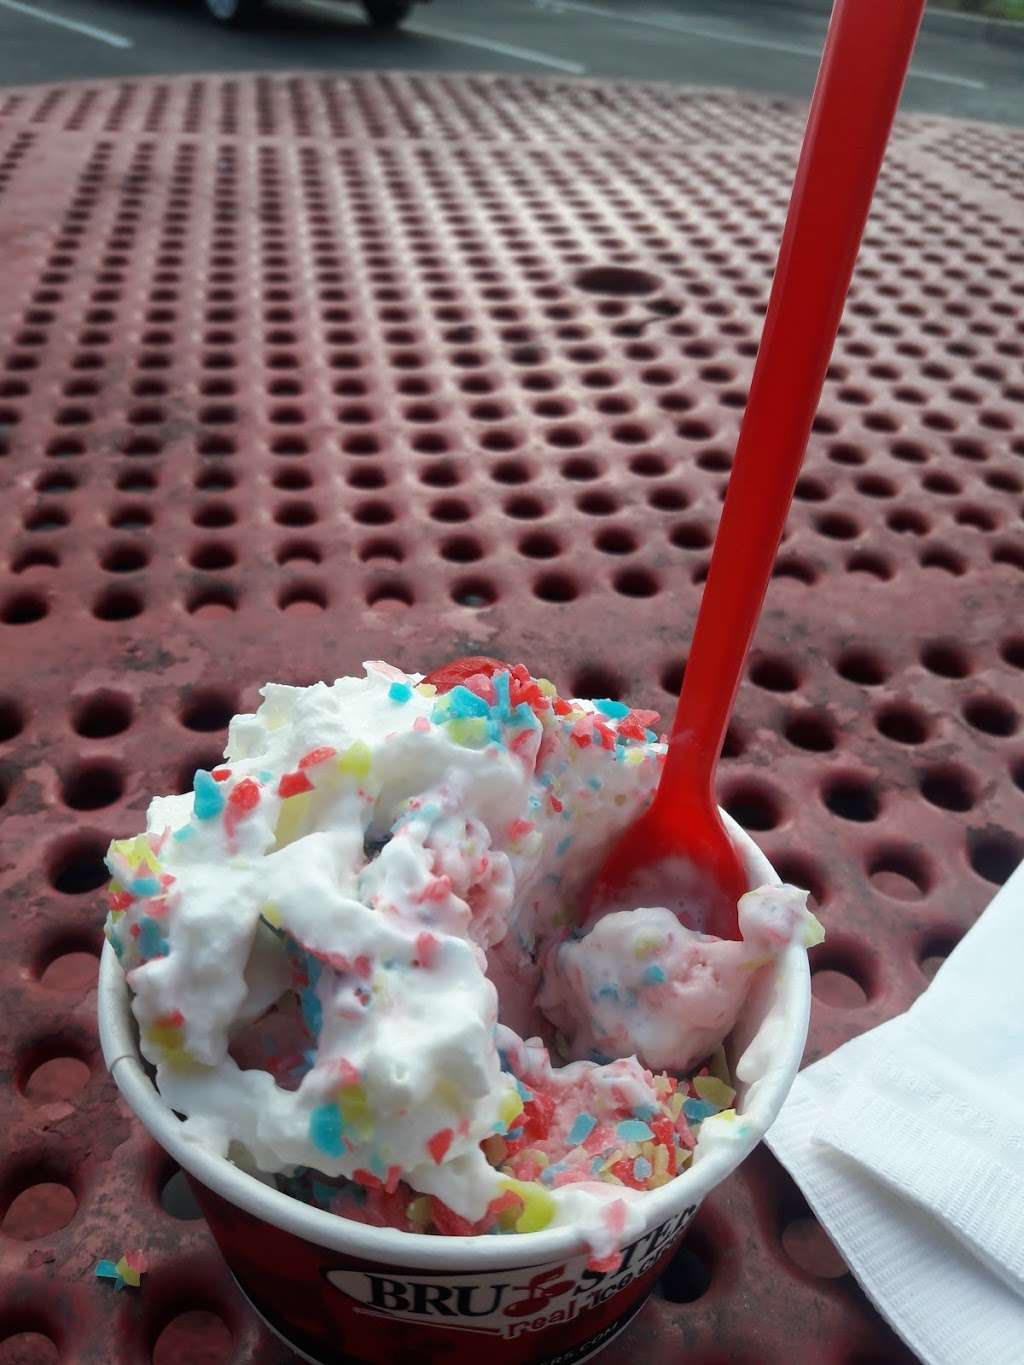 Brusters Real Ice Cream | 855 Cheney Hwy, Titusville, FL 32780, USA | Phone: (321) 385-0400